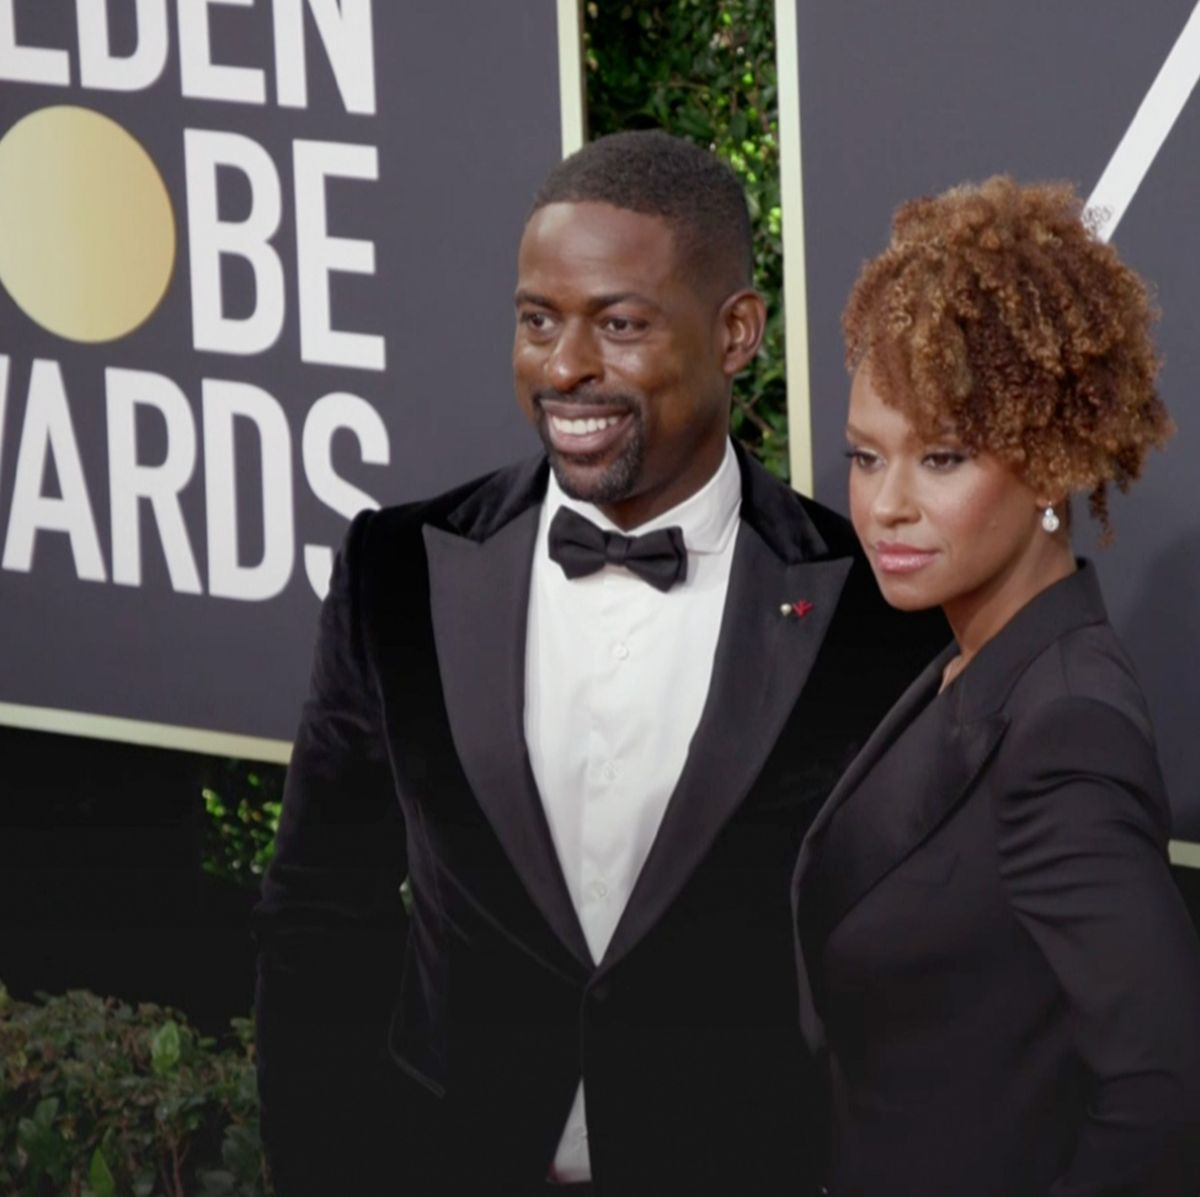 preview for ‘This Is Us’ star Sterling K. Brown’s Love Story